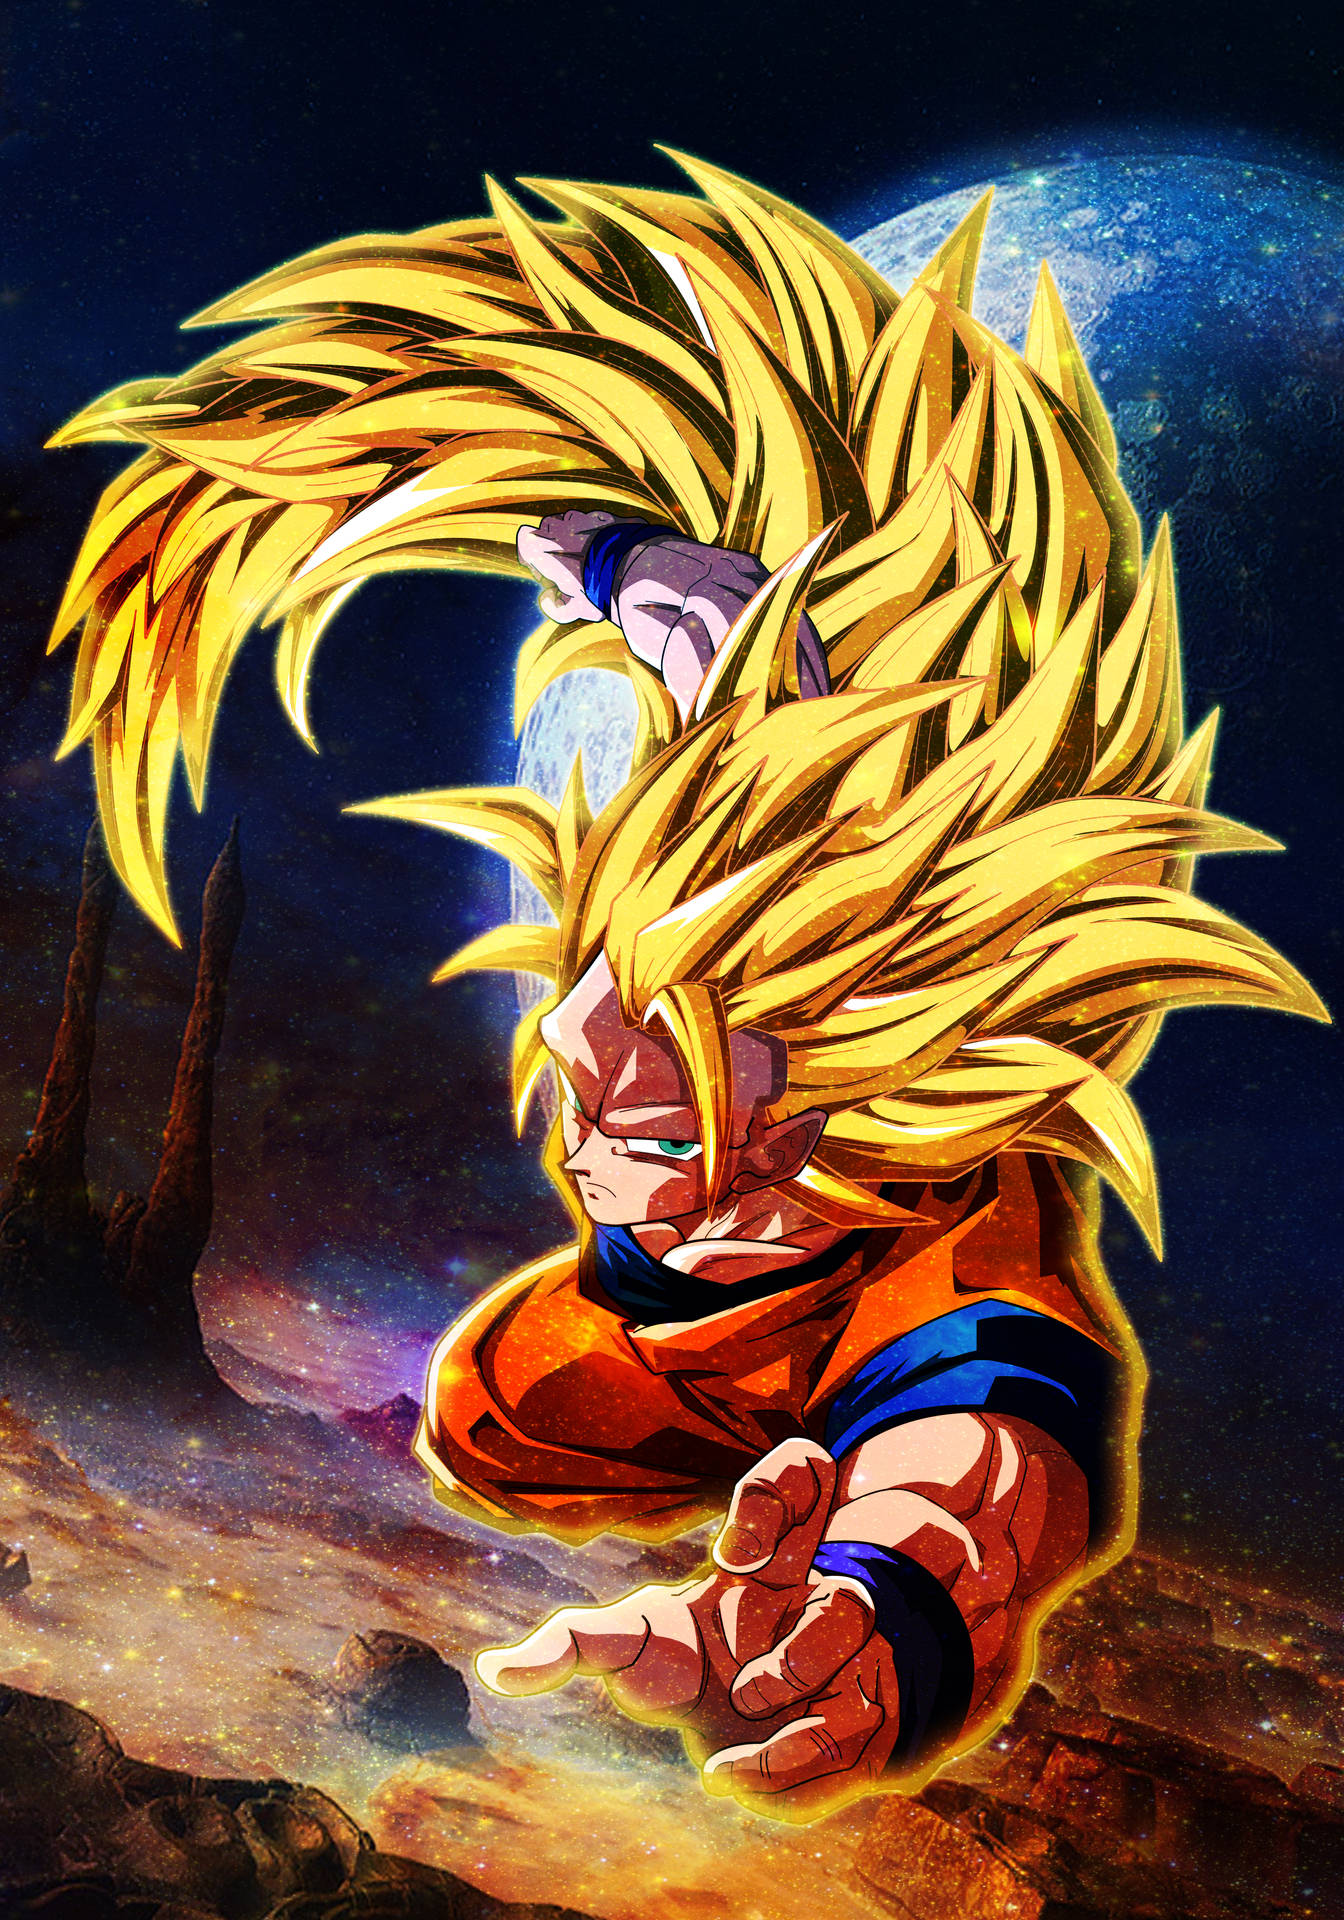 Dragon Ball Z Apk Is A Popular Wallpaper Application For Your Computer Or Mobile Device. With This Apk, You Can Have High-quality Dragon Ball Z Wallpapers As The Background Of Your Device. Choose From A Wide Selection Of Images Featuring Your Favorite Dragon Ball Z Characters And Scenes. Customize Your Device With Goku, Vegeta, Gohan, And Many More Iconic Characters From The Beloved Anime Series. Download Dragon Ball Z Apk Now And Bring The Power And Excitement Of Dragon Ball Z To Your Device. Wallpaper